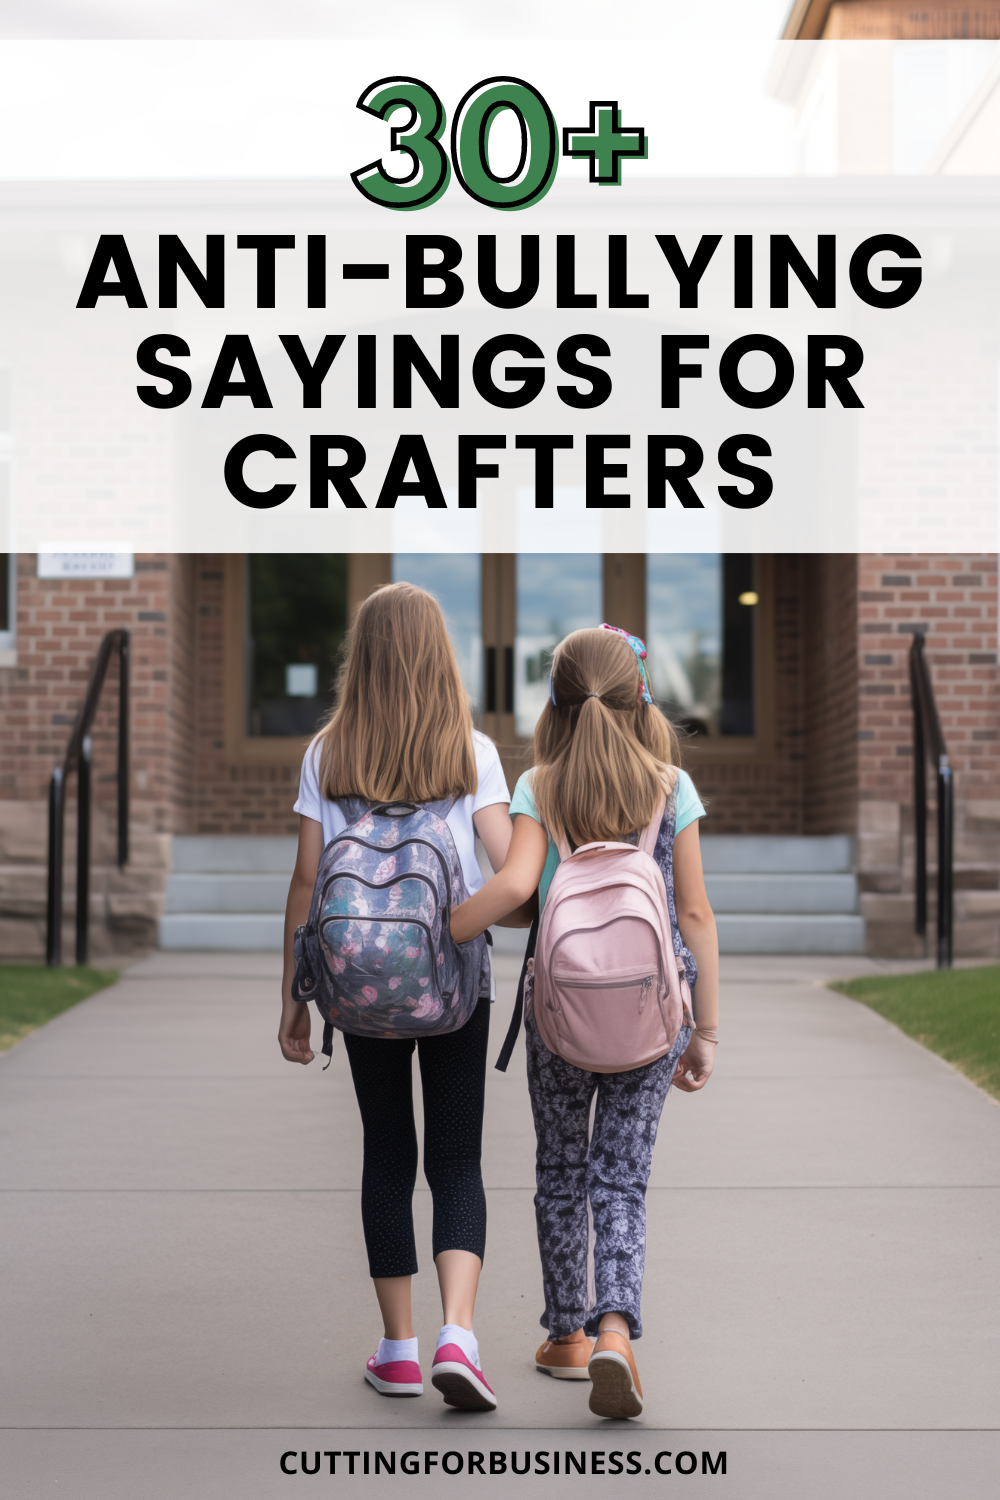 30+ Anti Bullying Sayings for Crafters - cuttingforbusiness.com